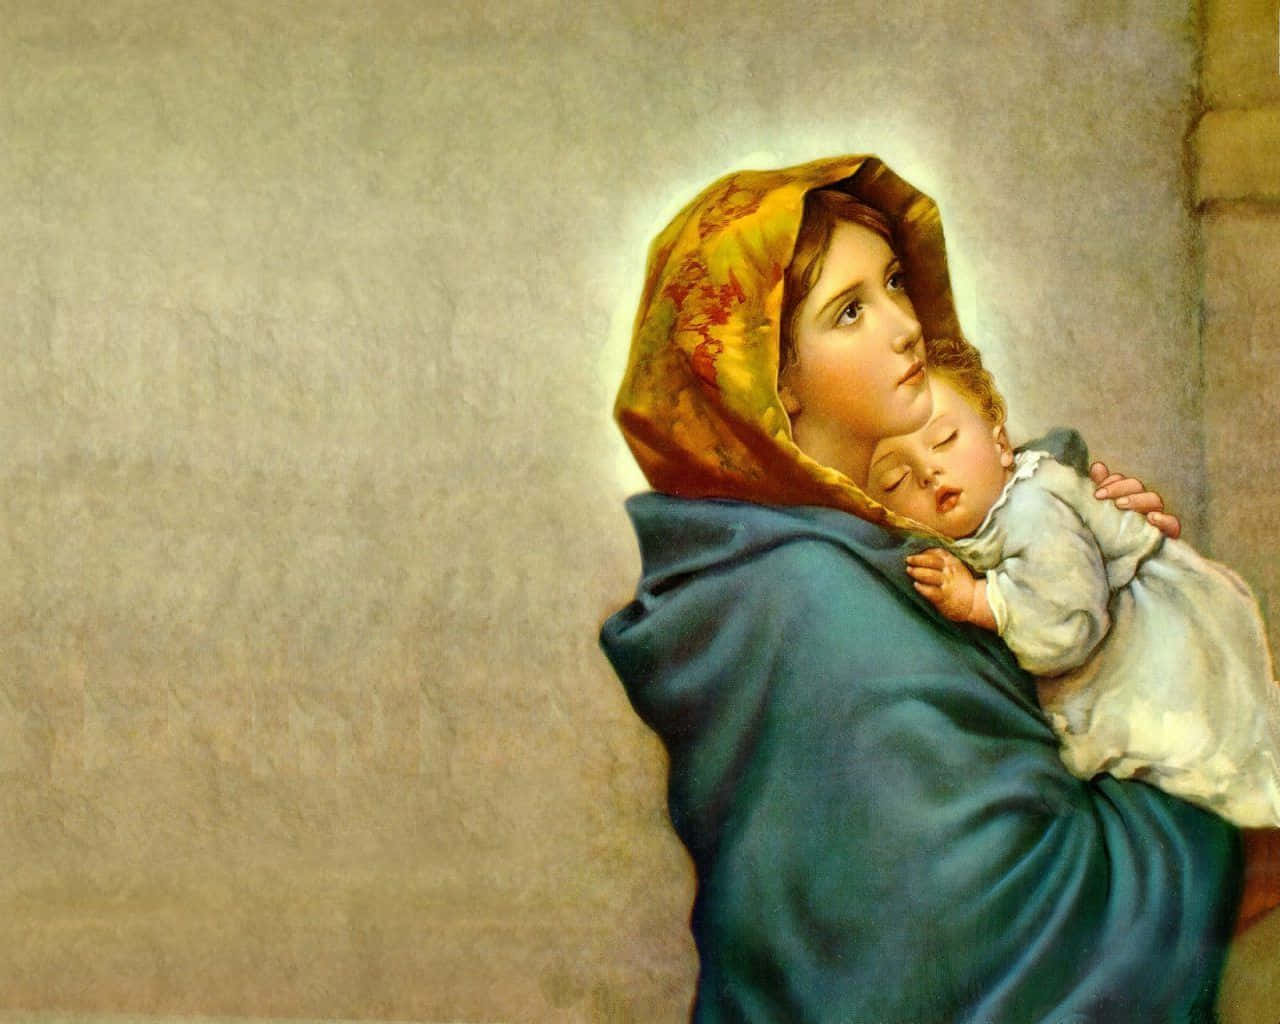 Virgin Mary Venerated And Honored By Catholics Around The World